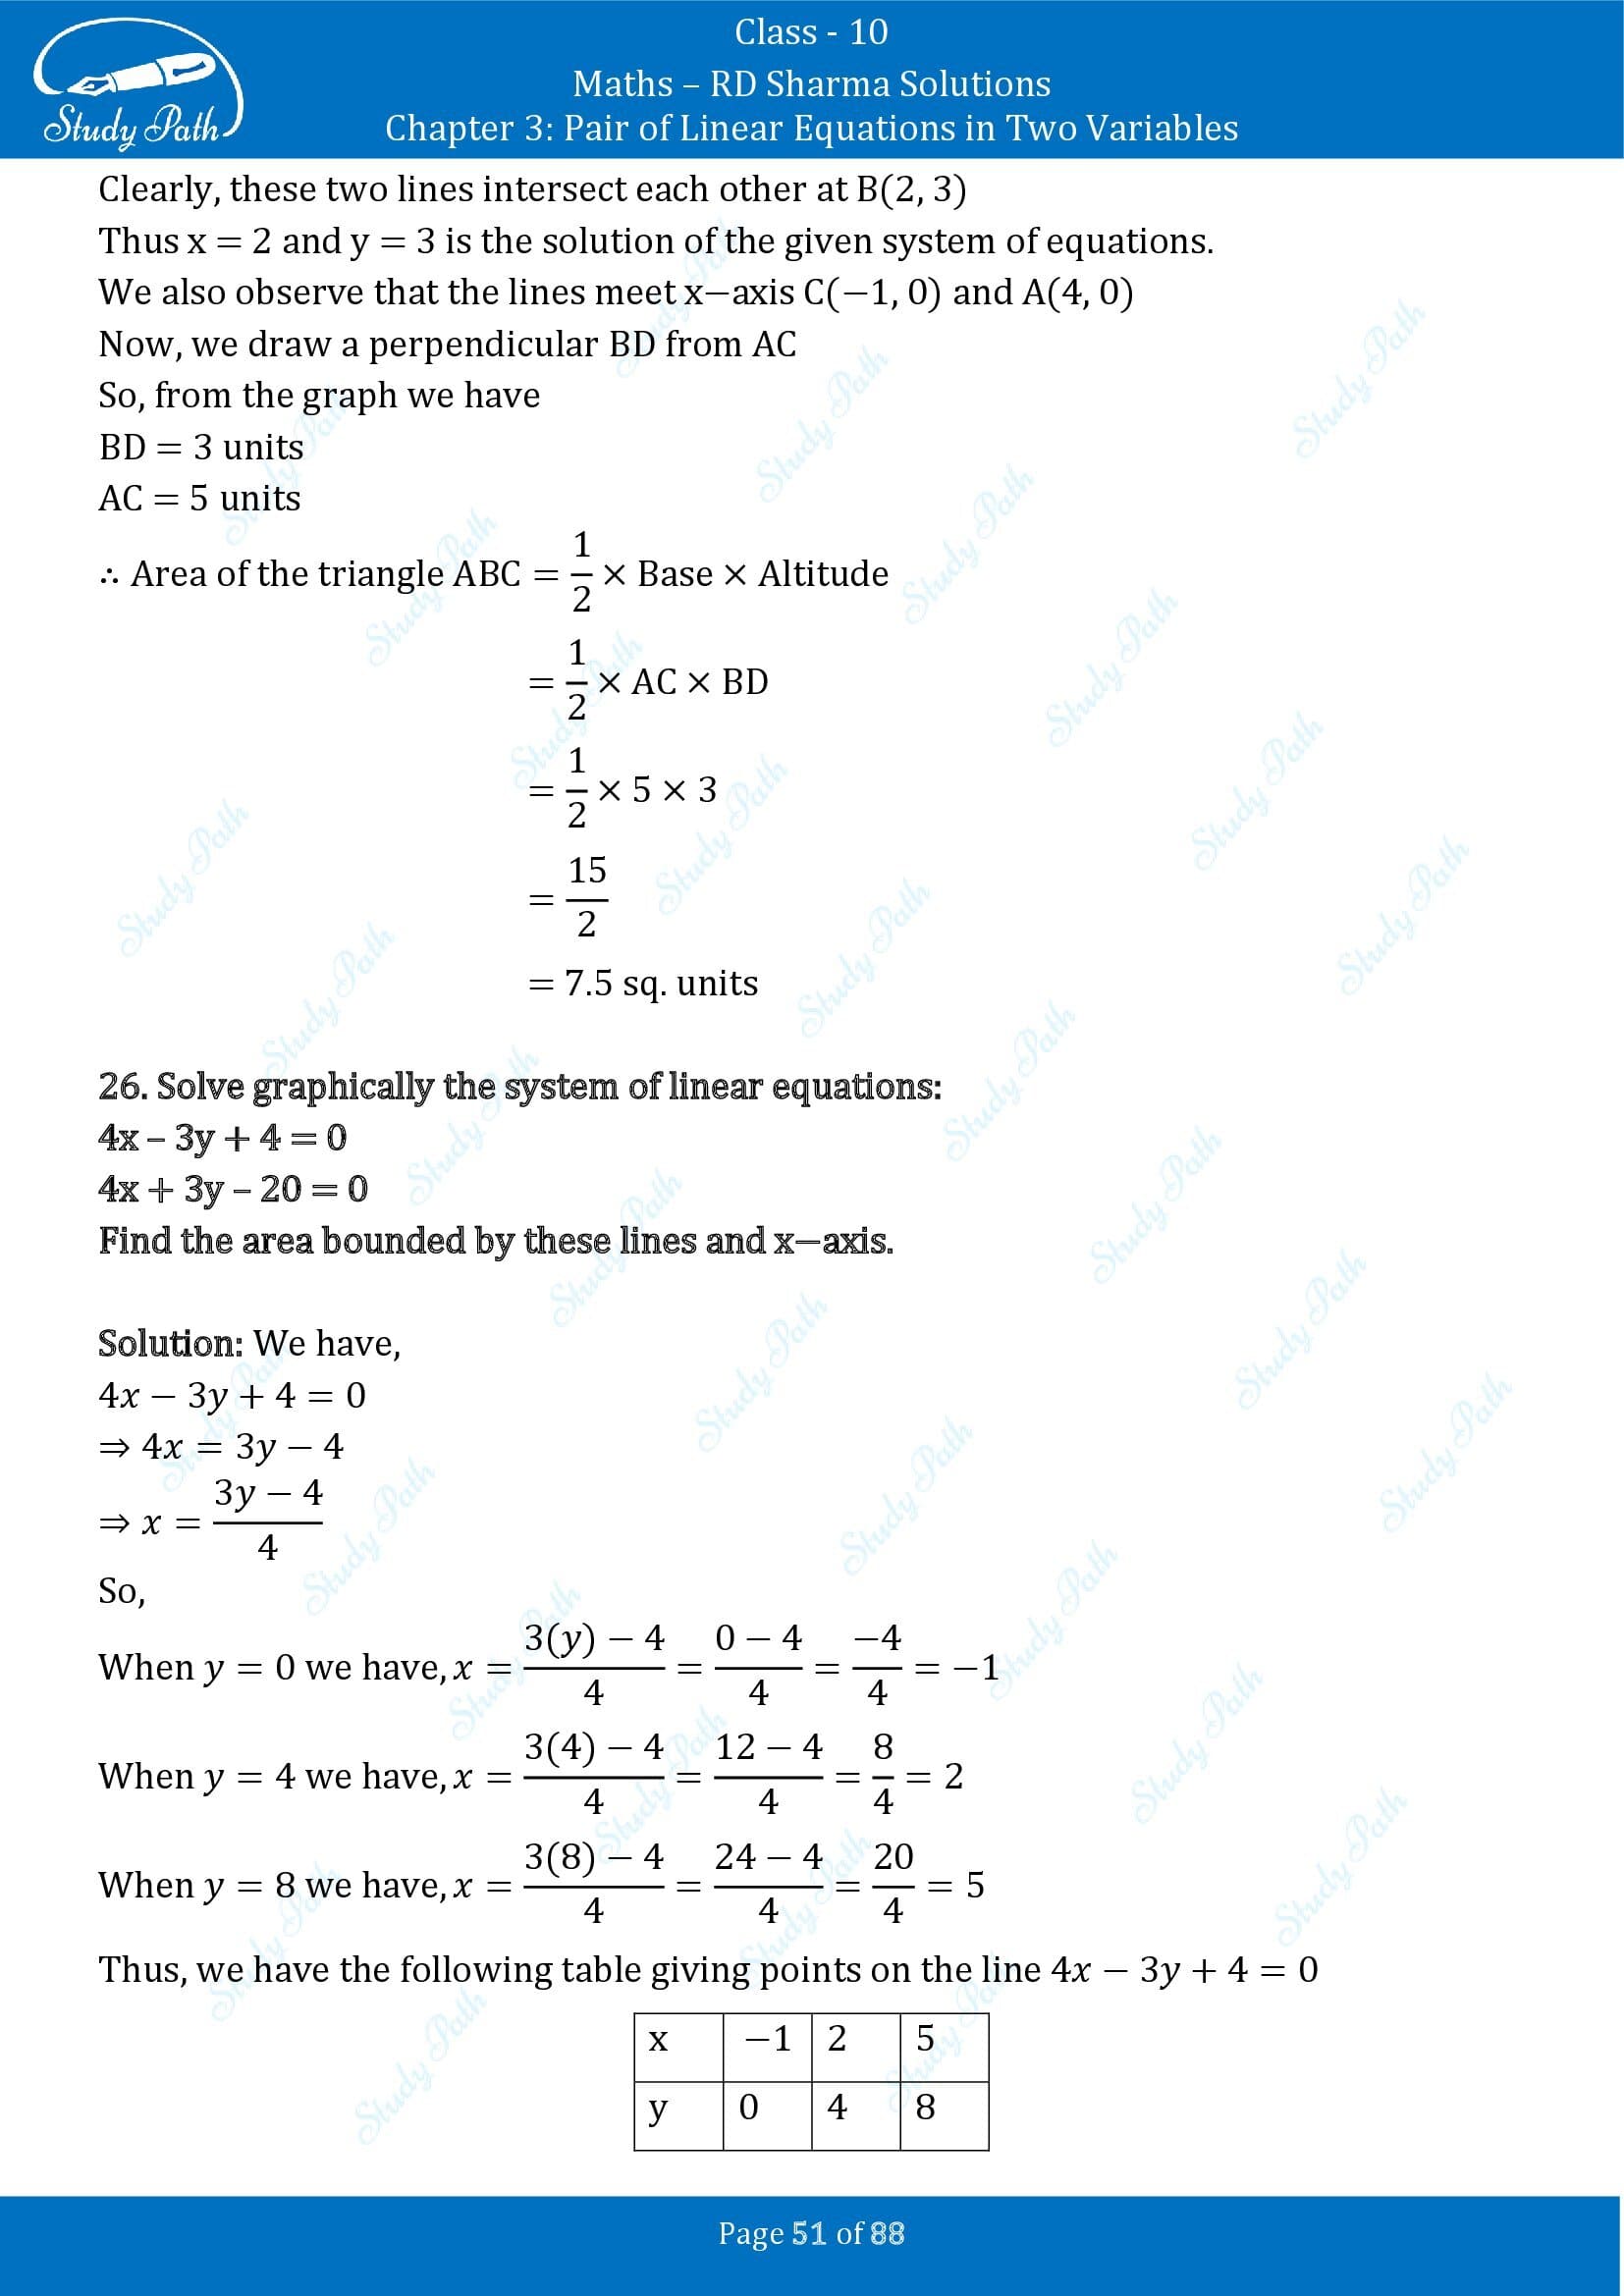 RD Sharma Solutions Class 10 Chapter 3 Pair of Linear Equations in Two Variables Exercise 3.2 00051